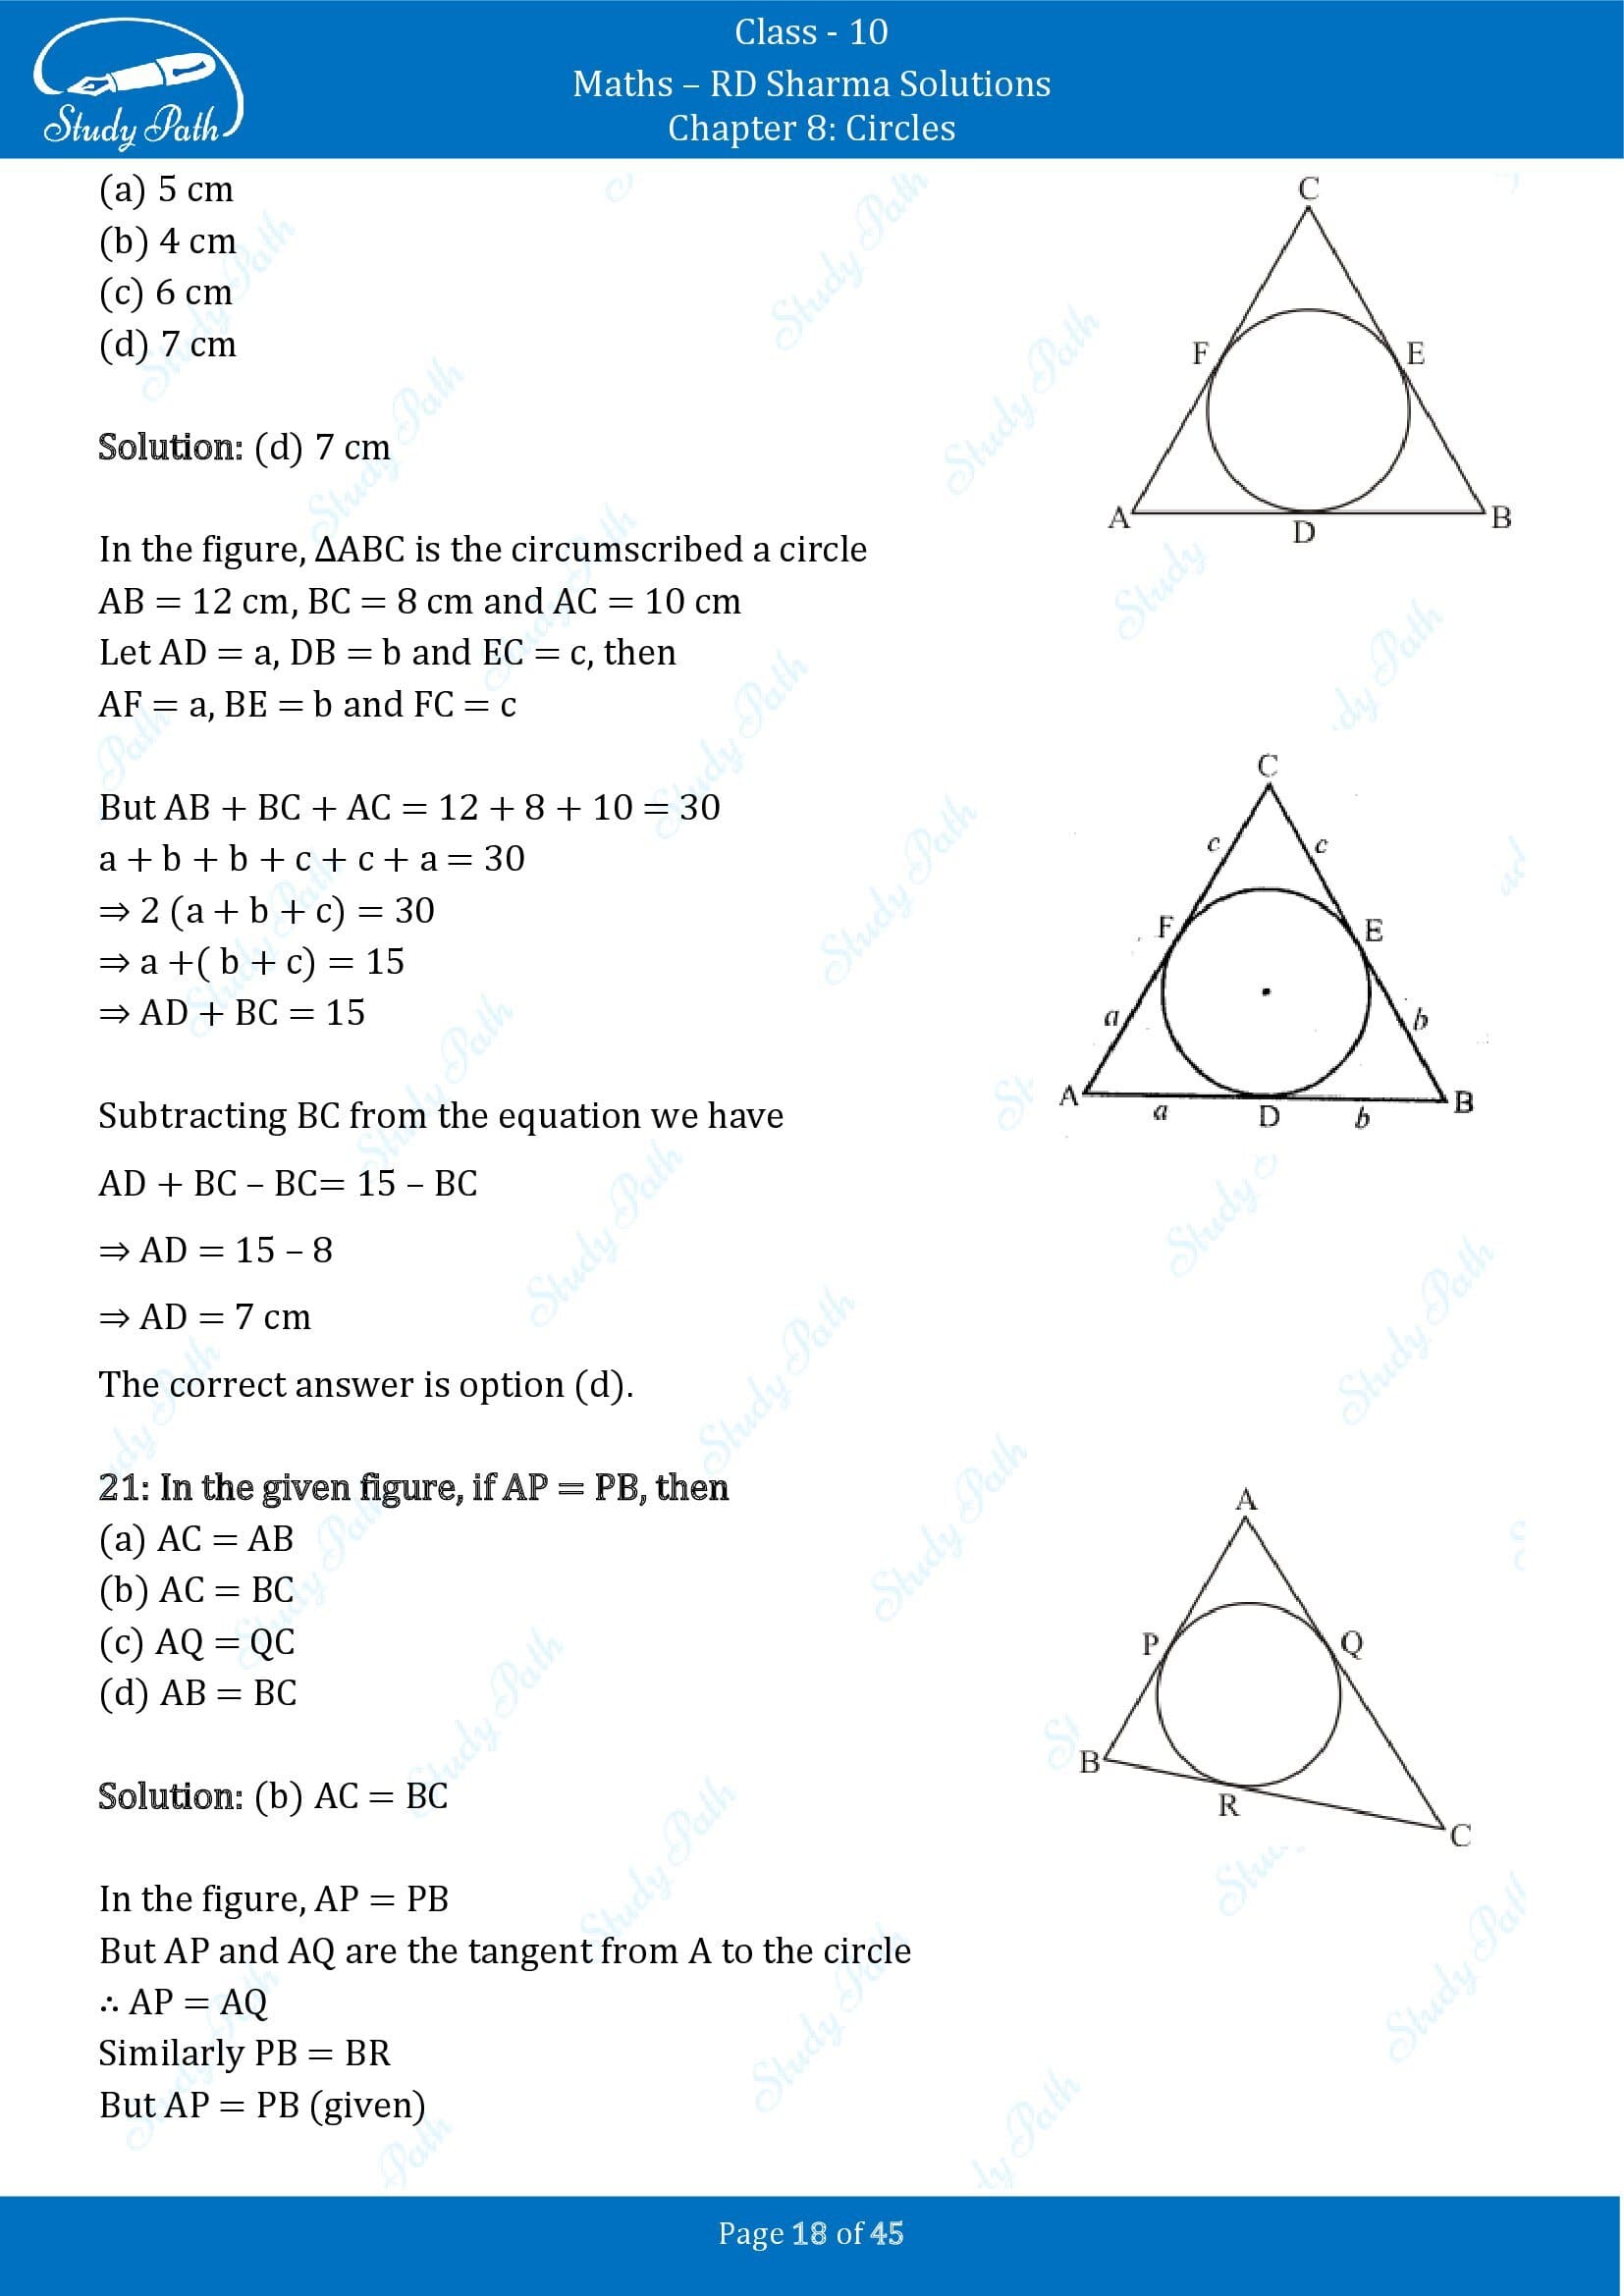 RD Sharma Solutions Class 10 Chapter 8 Circles Multiple Choice Questions MCQs 00018